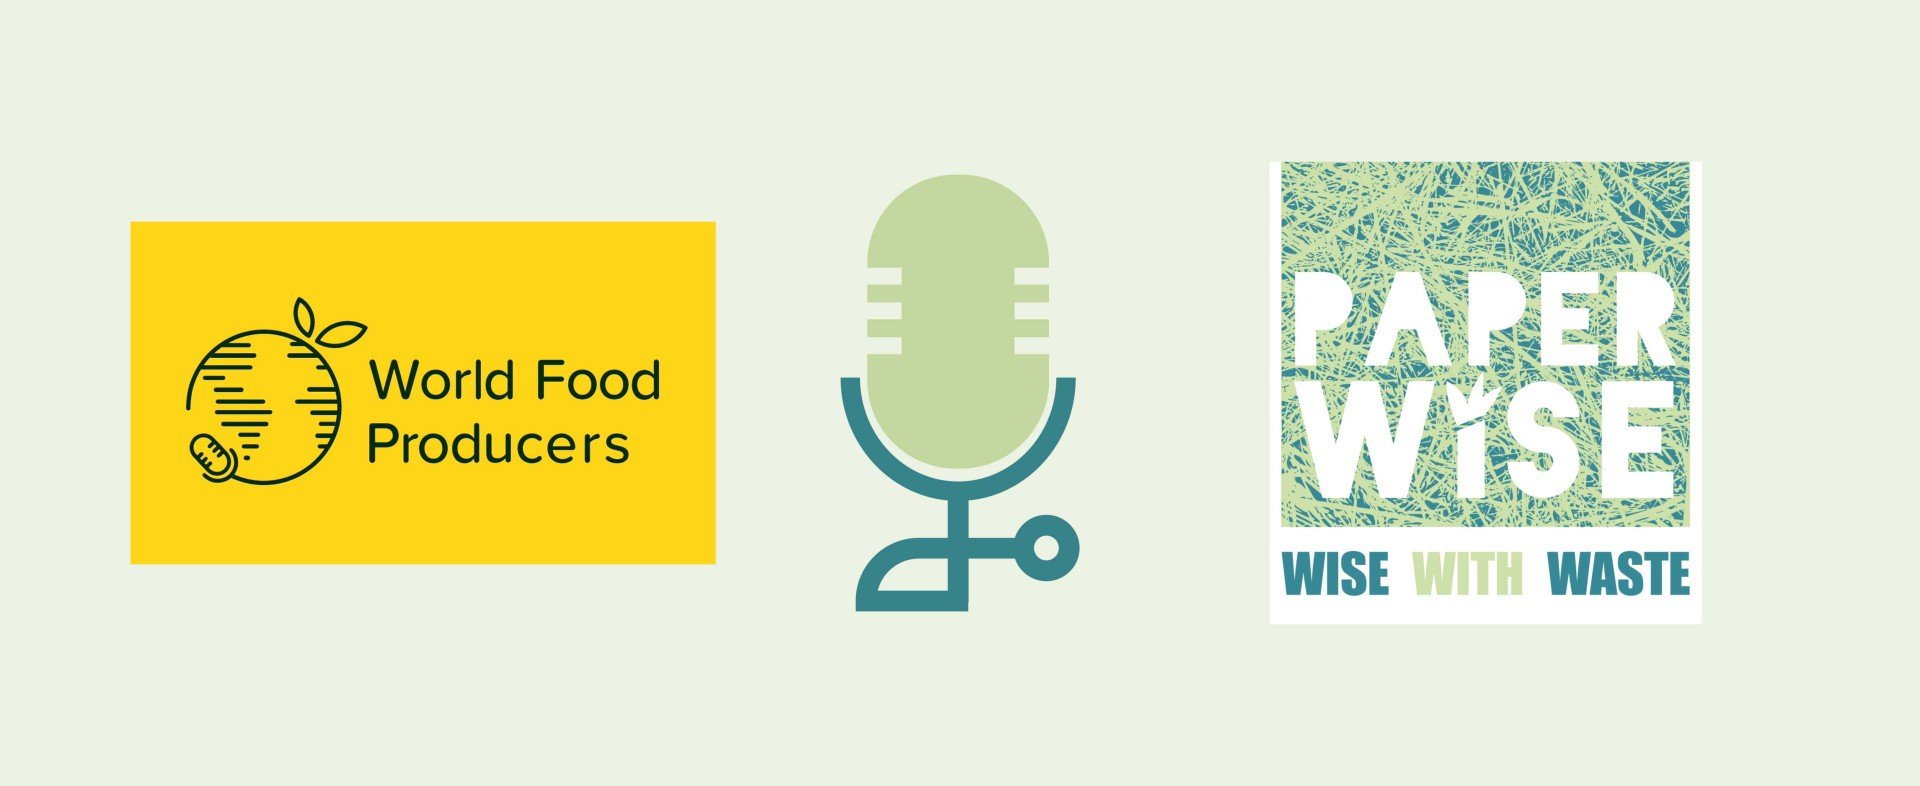 World Food Producers interviews PaperWise founder Peter van Rosmalen